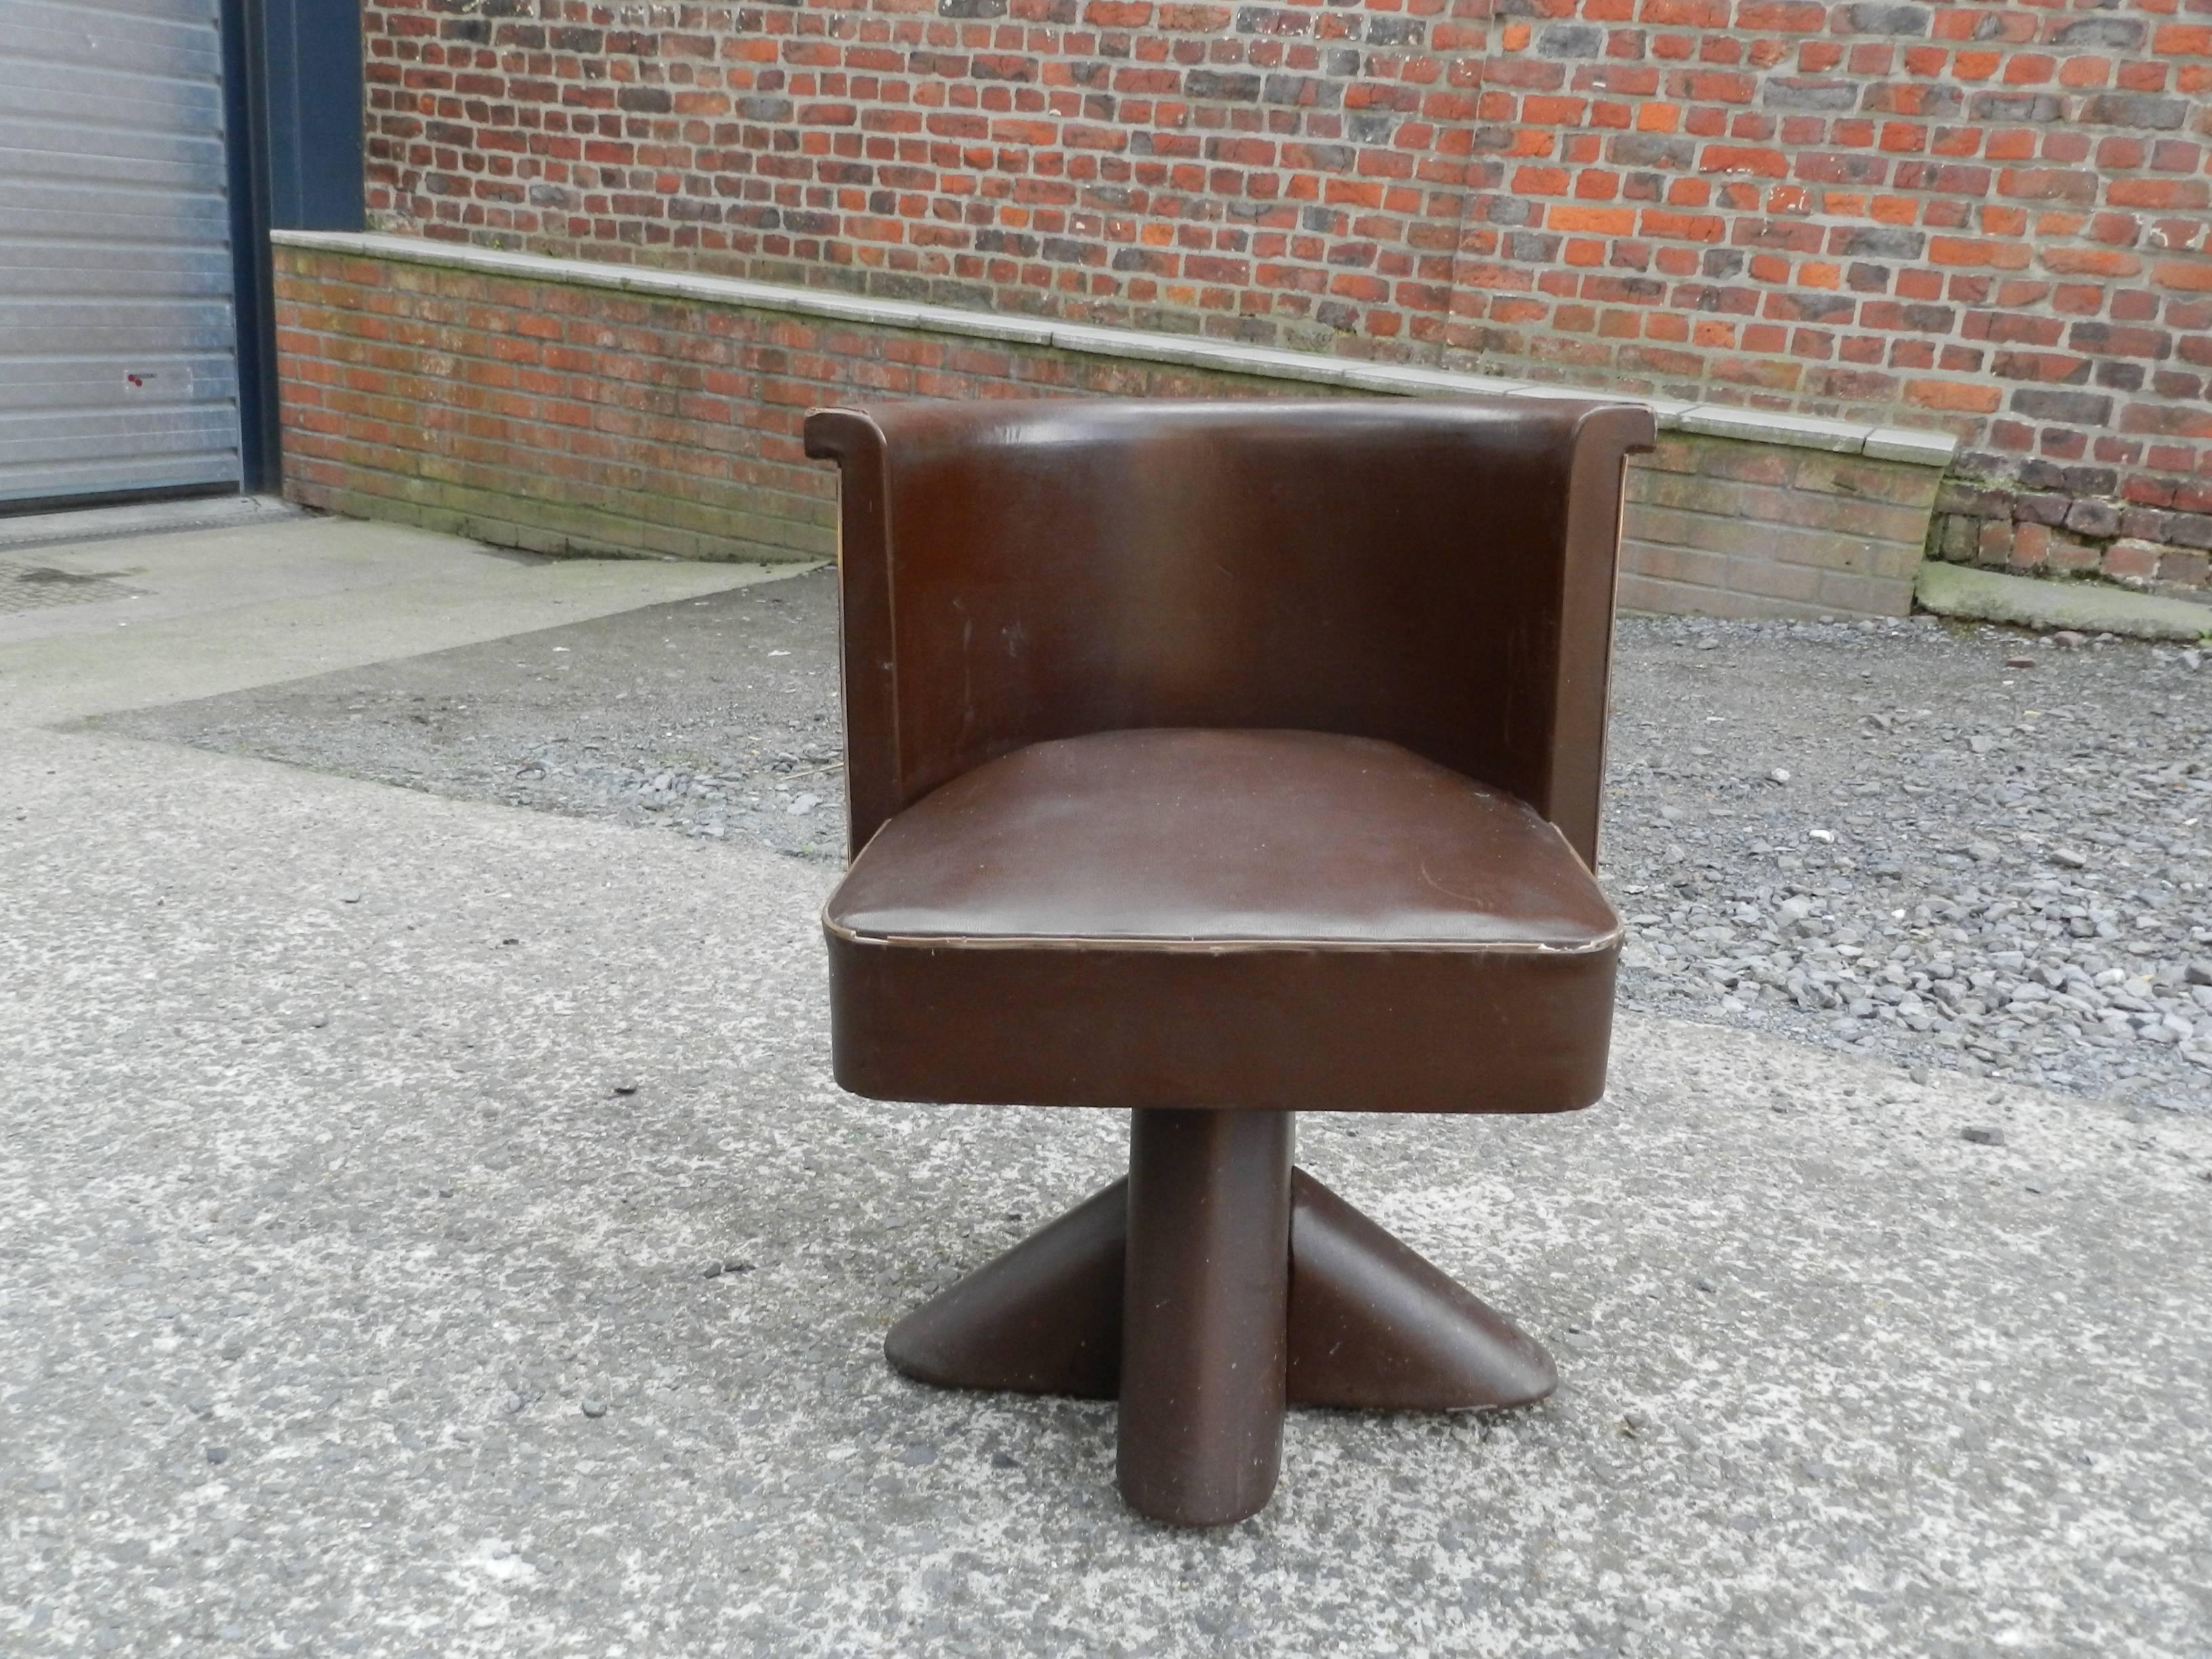 Original Modernist Art Deco armchair in faux leather, circa 1920-1930 
Pivoting with wheels.
  